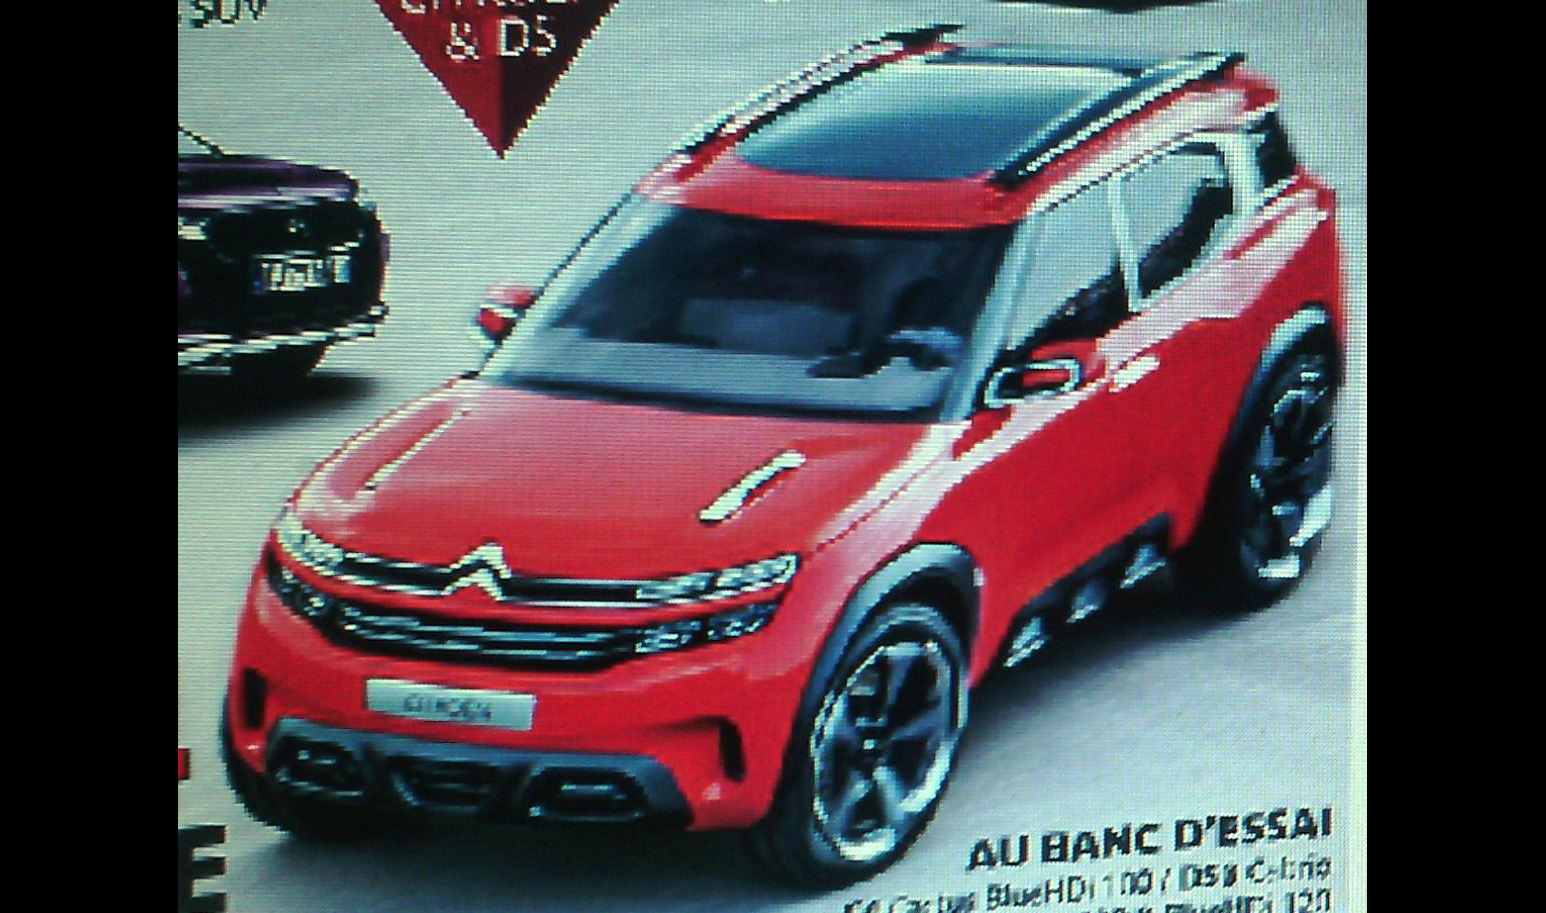 New Citroen Aircross concept revealed in leaked image